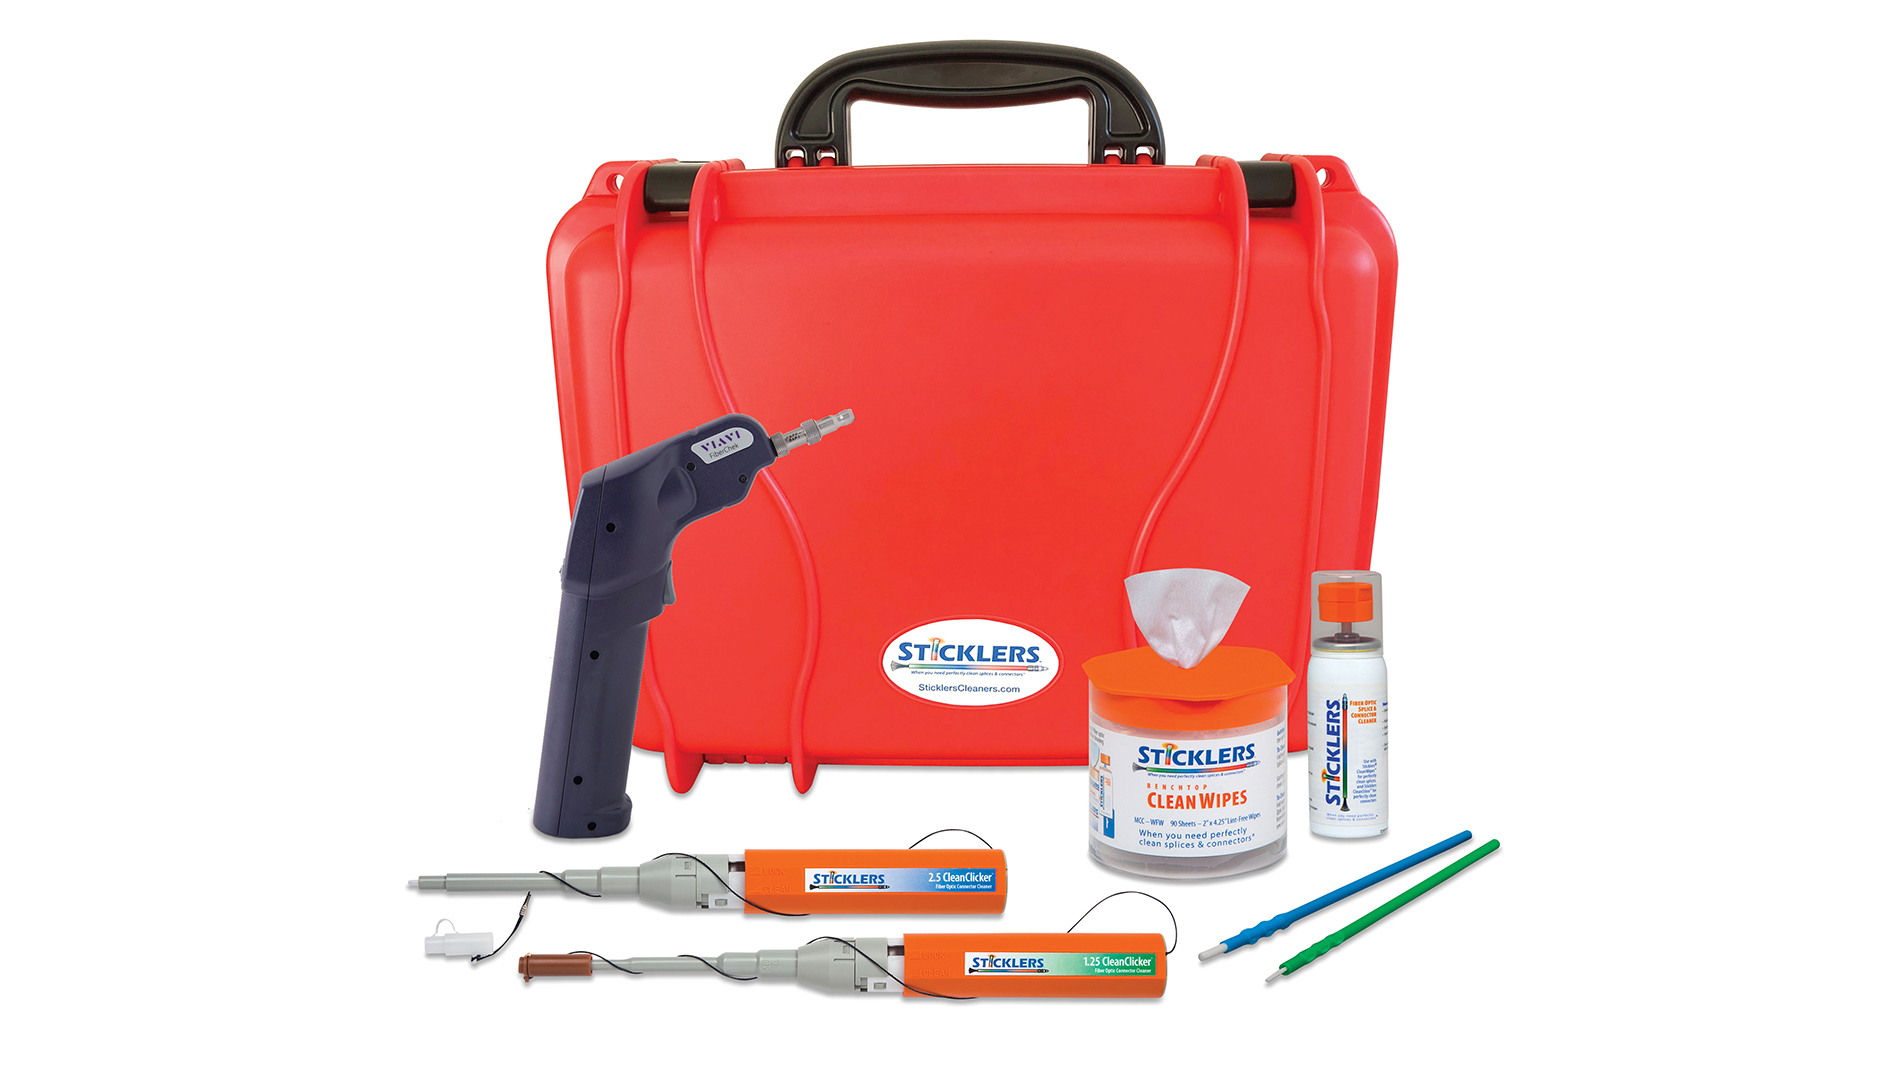 Sticklers' Fiber Optic Inspection and Cleaning Kit